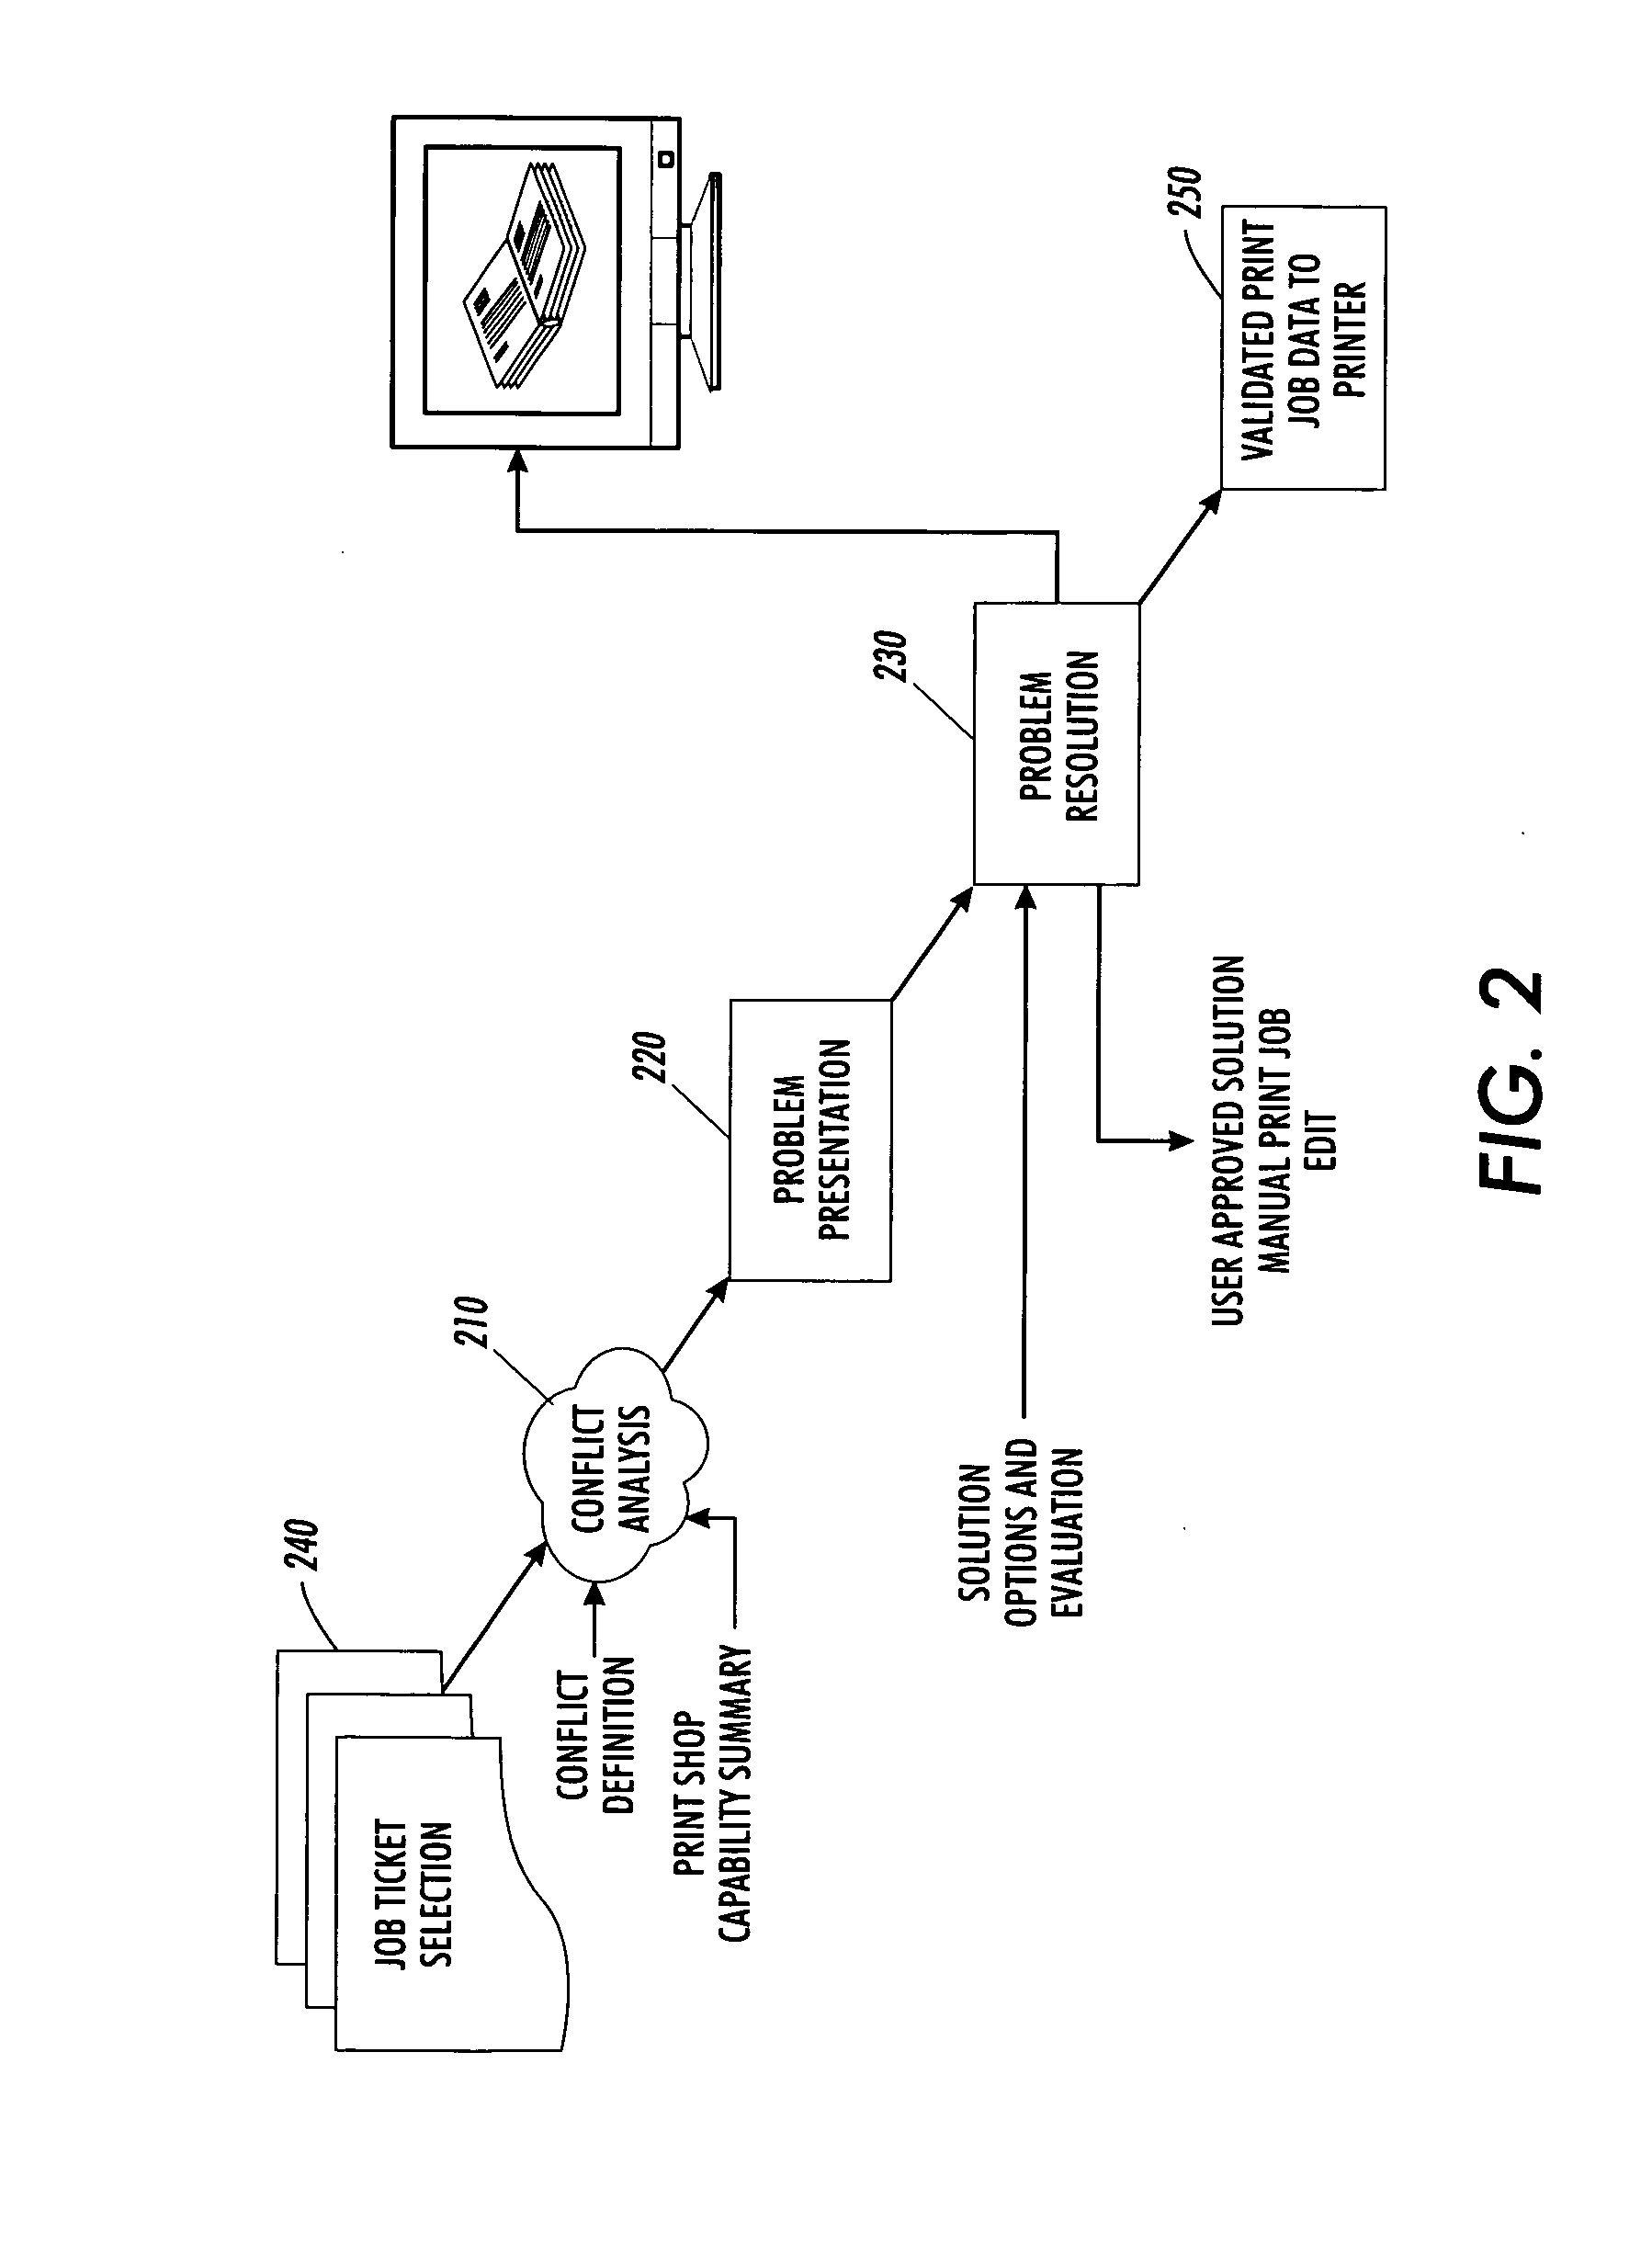 Method and system for print production conflict visualization